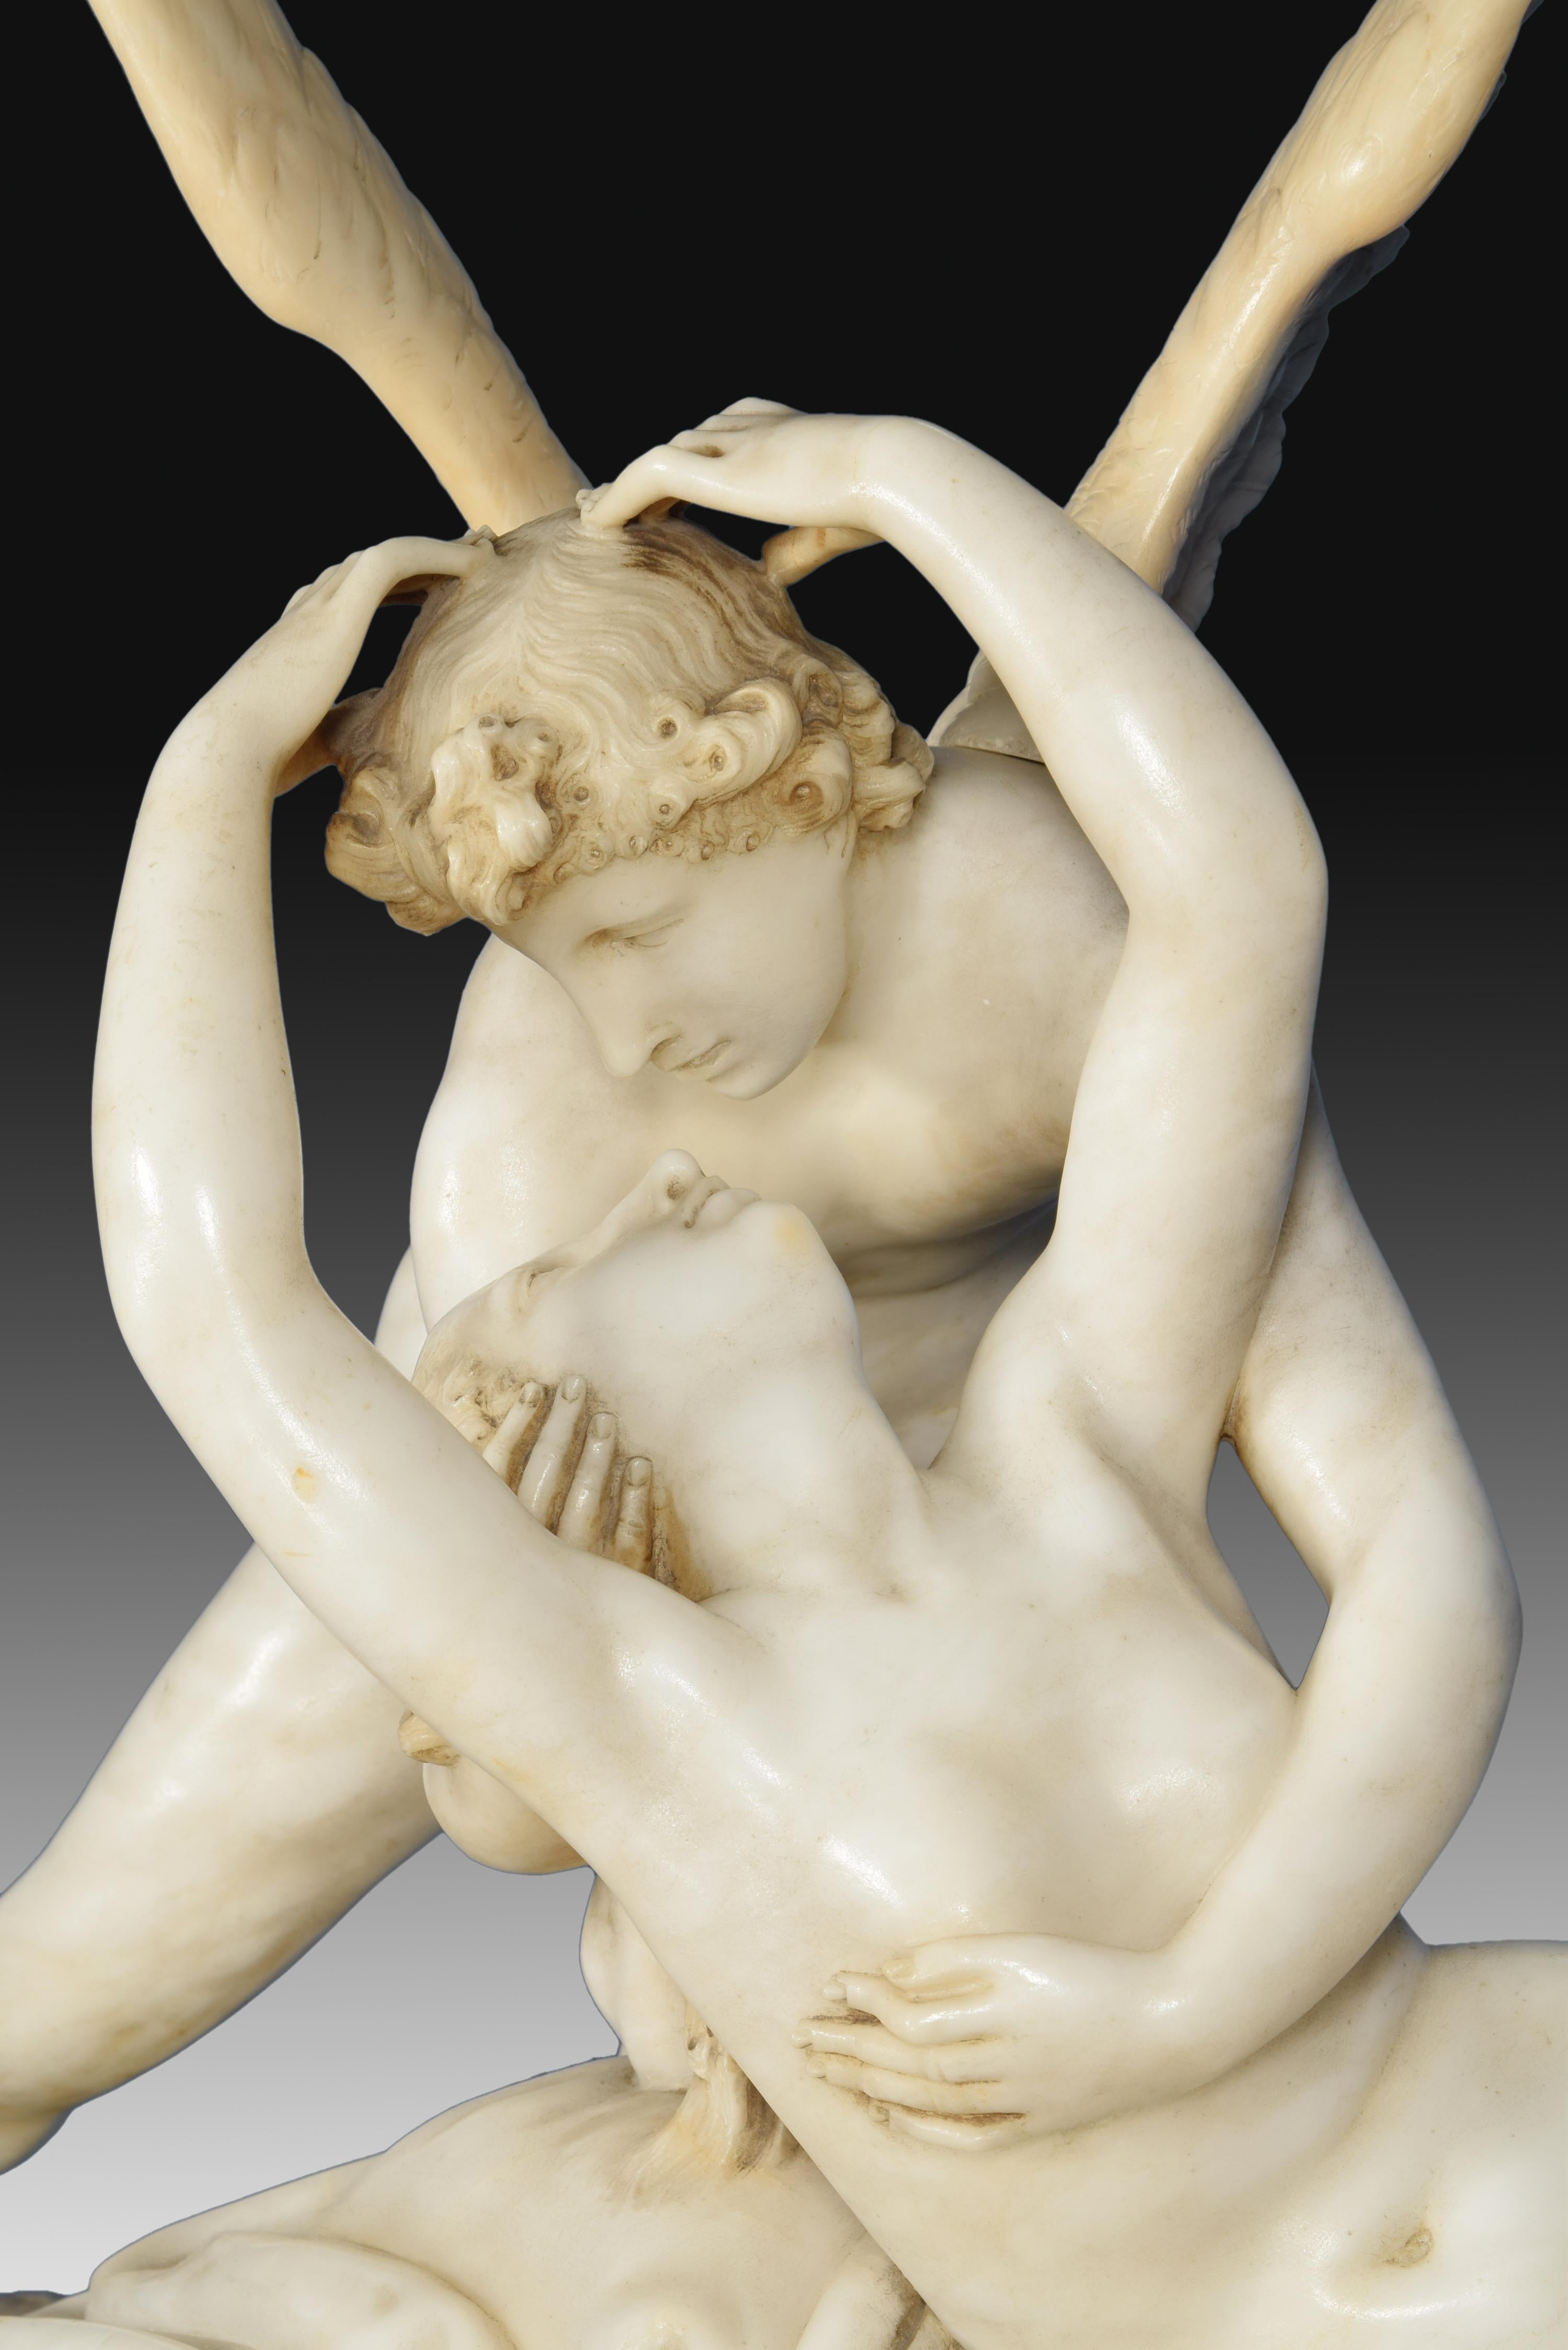 19th Century Psyche Revived by Cupid's Kiss, Alabaster, Marble, after Antonio Canova